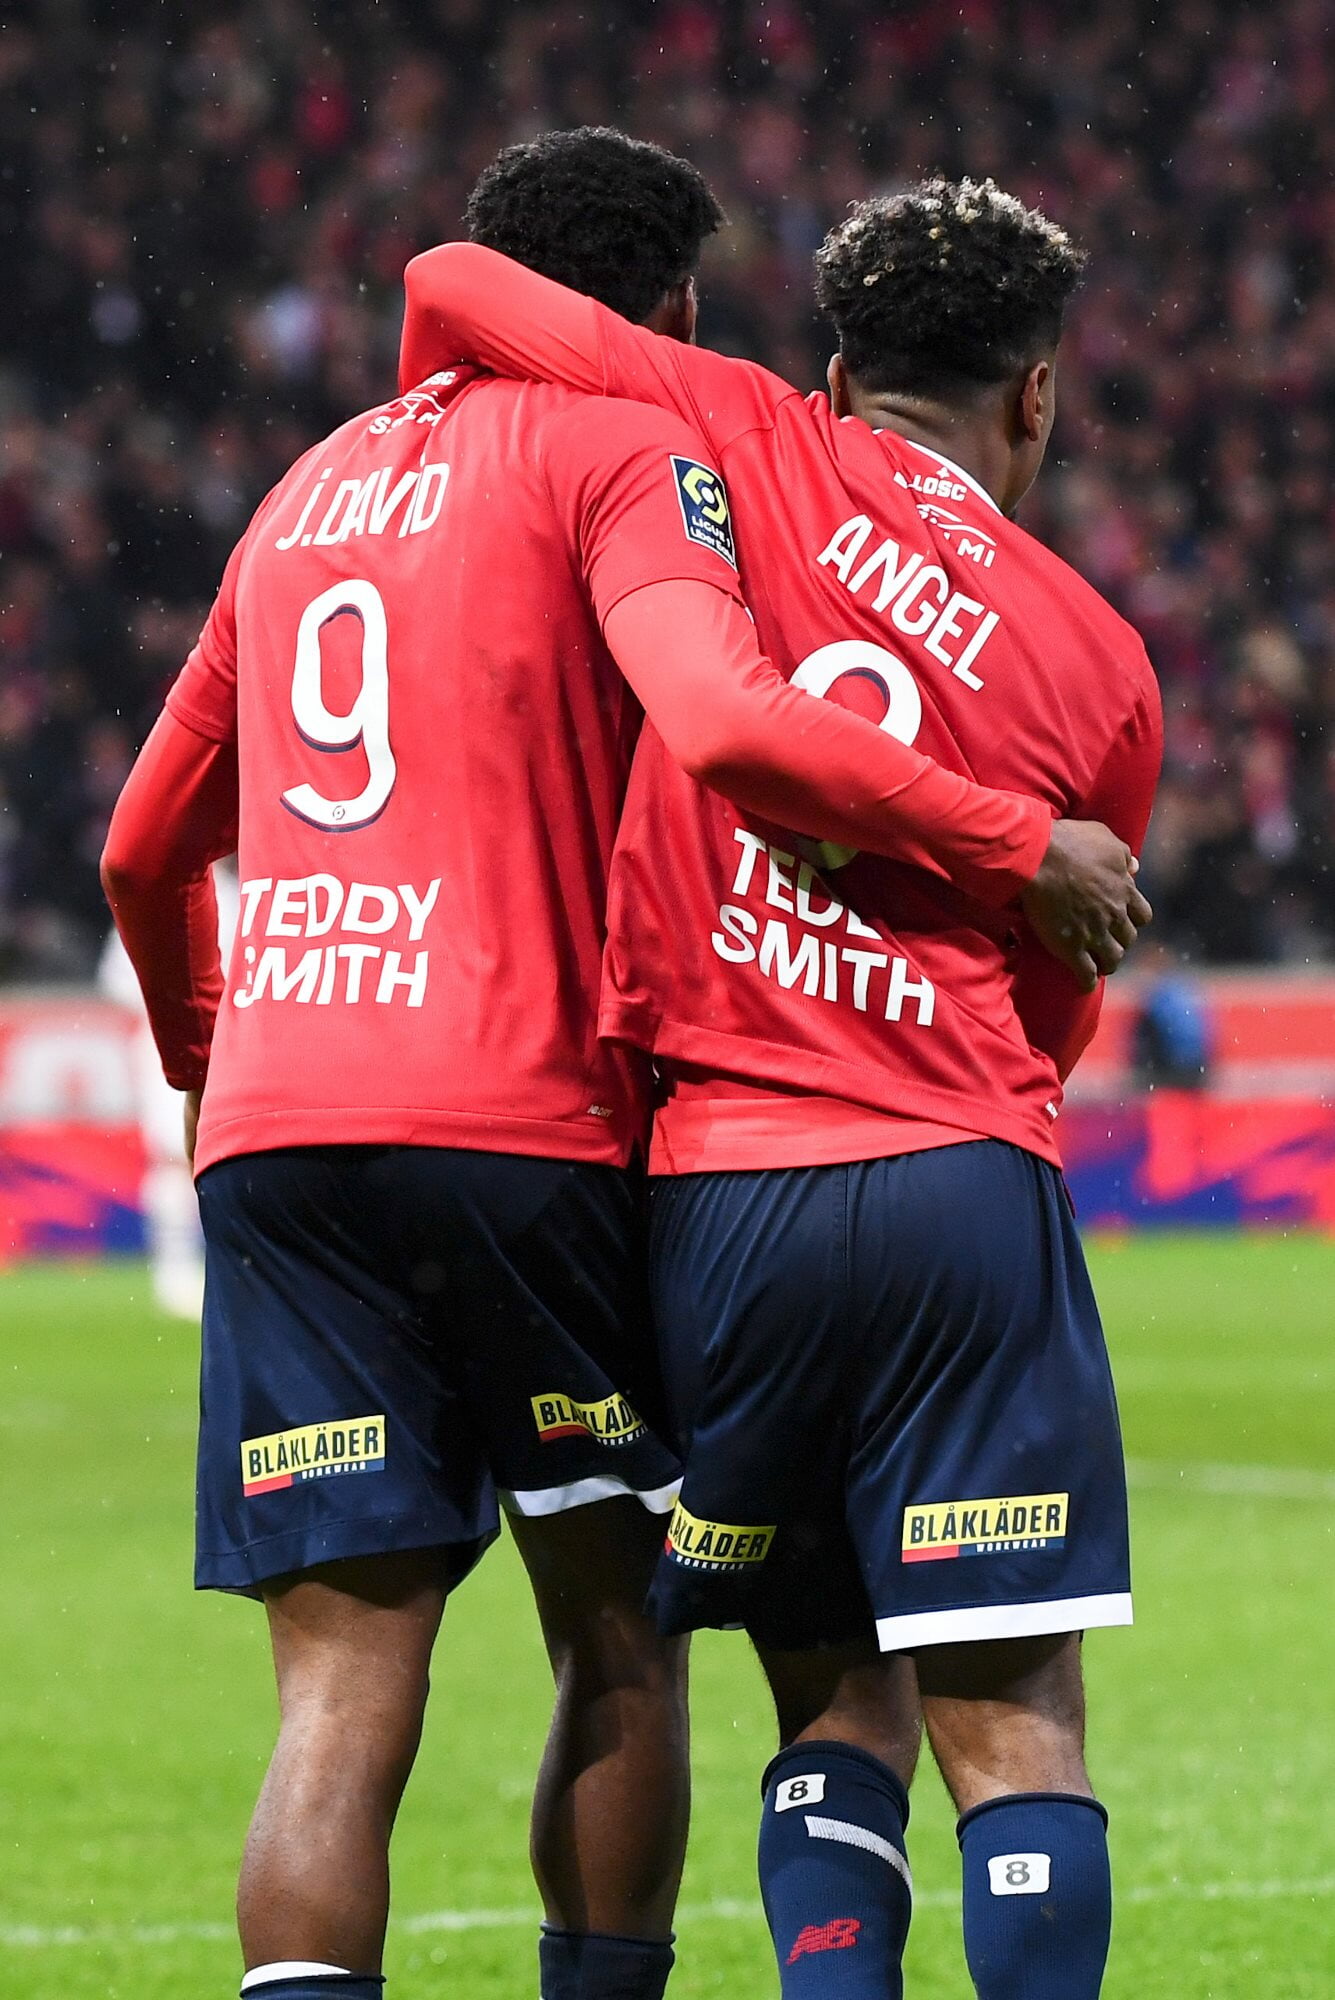 Lille players